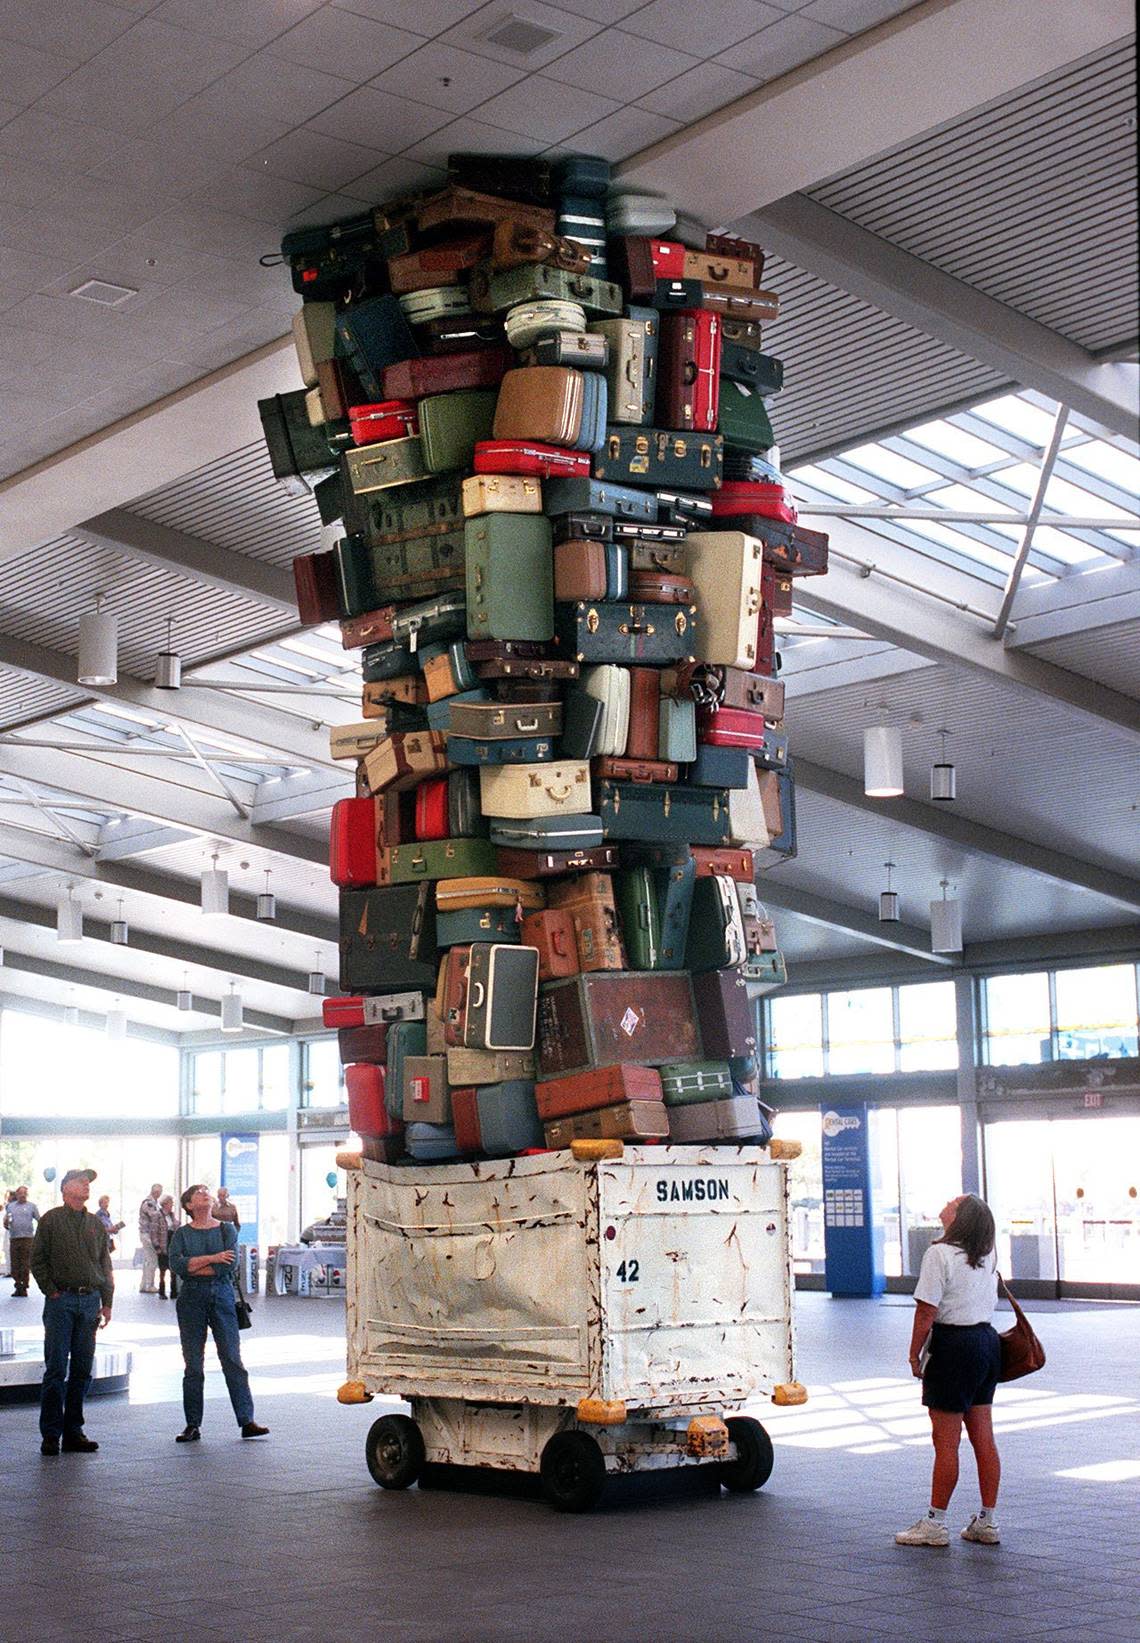 Folks stop in amusement and admiration in 1998 to view “Samson,” one of two similar suitcase sculptures by artist Brian Goggin that greet travelers in the baggage claim area of Terminal A at Sacramento International Airport.